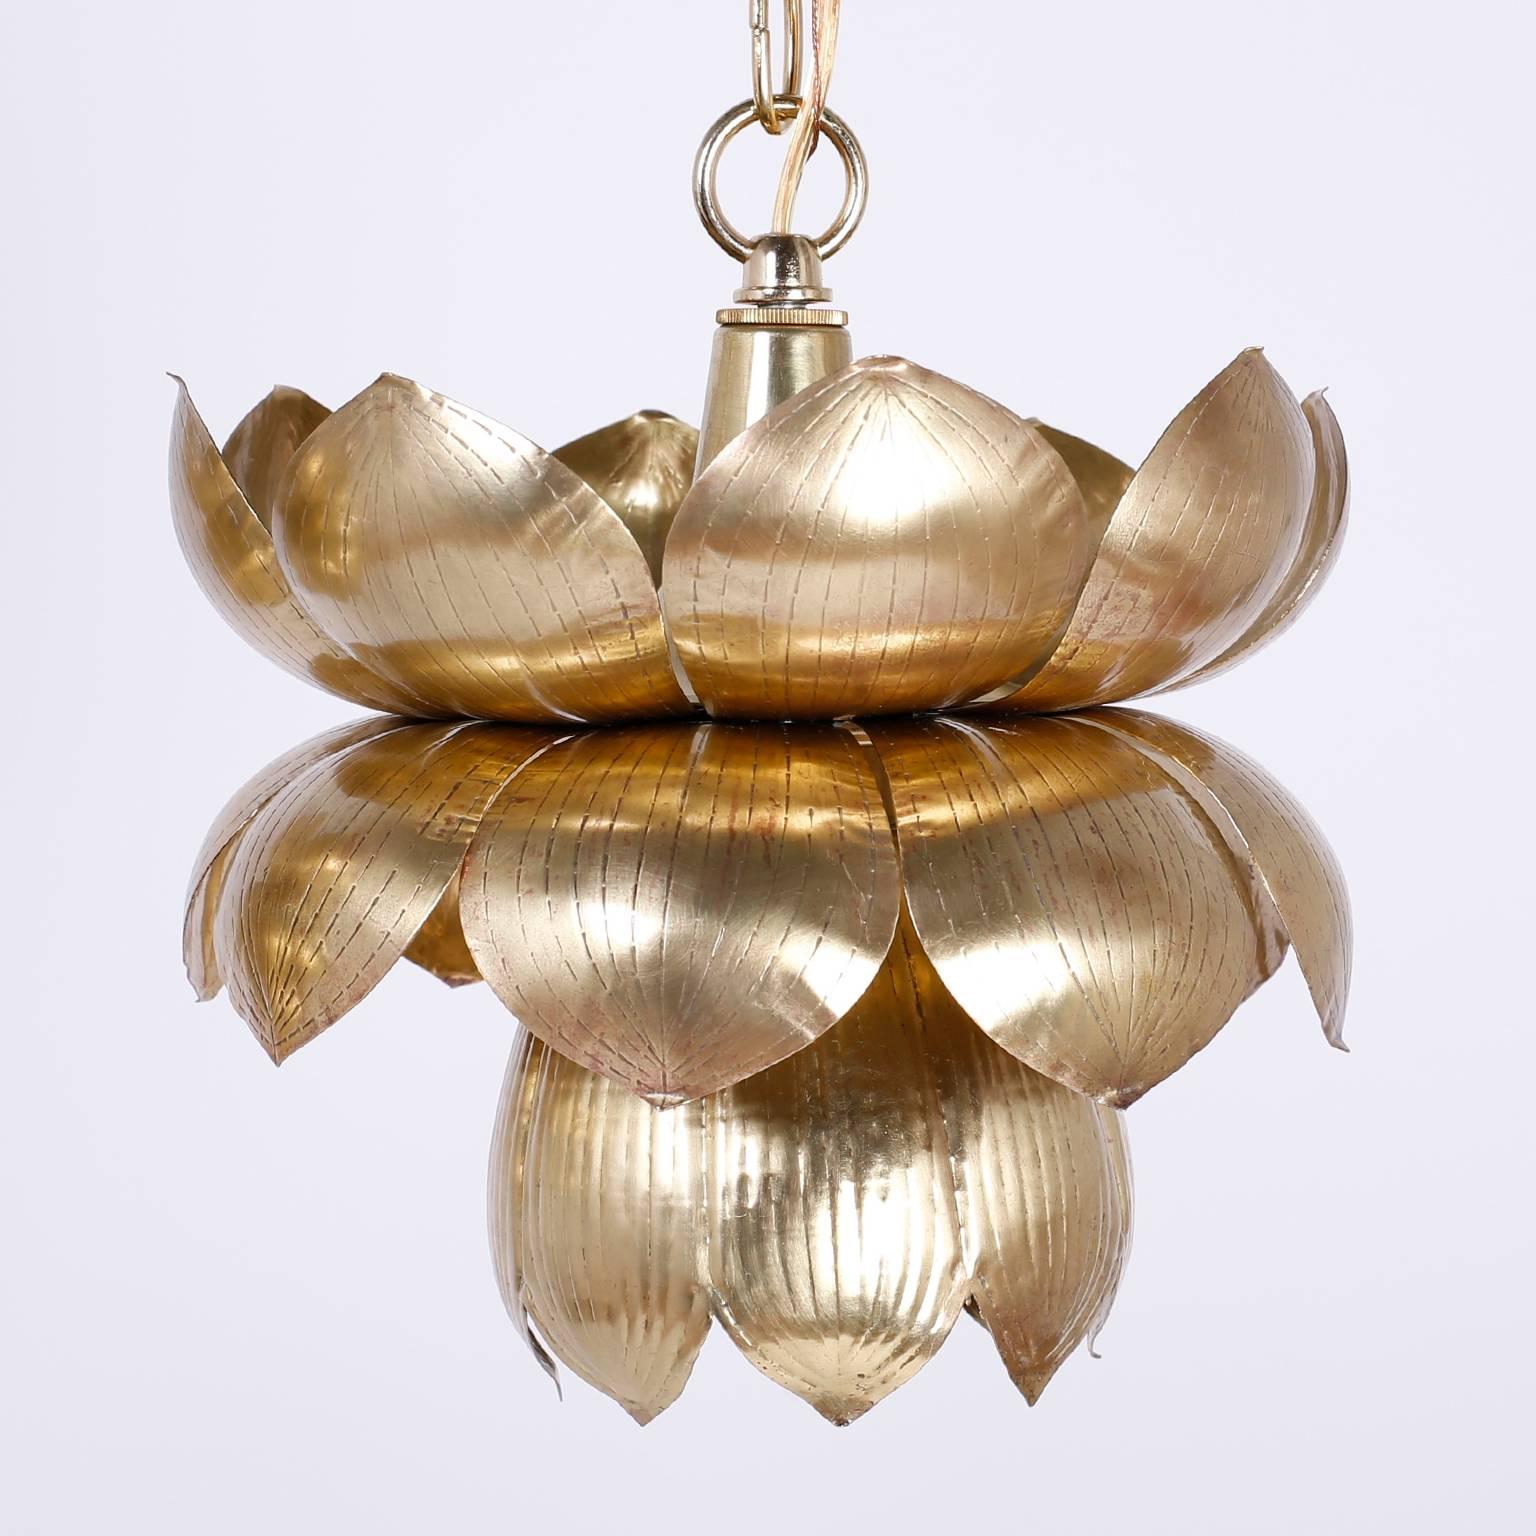 Six individual exotic lotus lights or pendants crafted in brass with a one bulb socket inside. Wired hand polished and lacquered for easy care and sold separately. Probably Feldman.